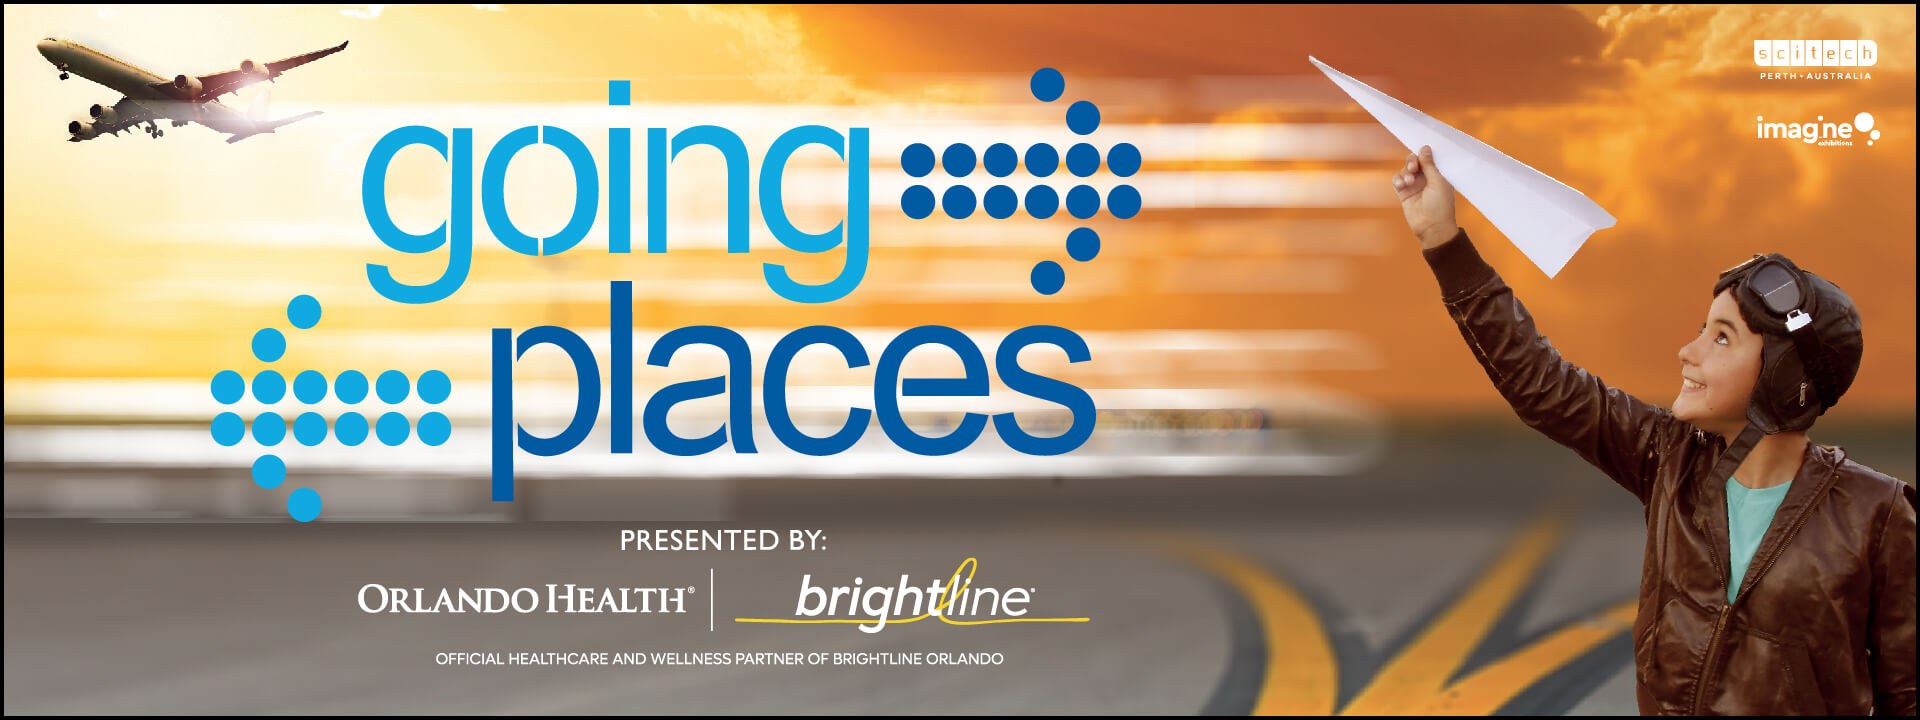 Going Places - Locally presented by Orlando Health and Brightline, On Display January 21 - May 5